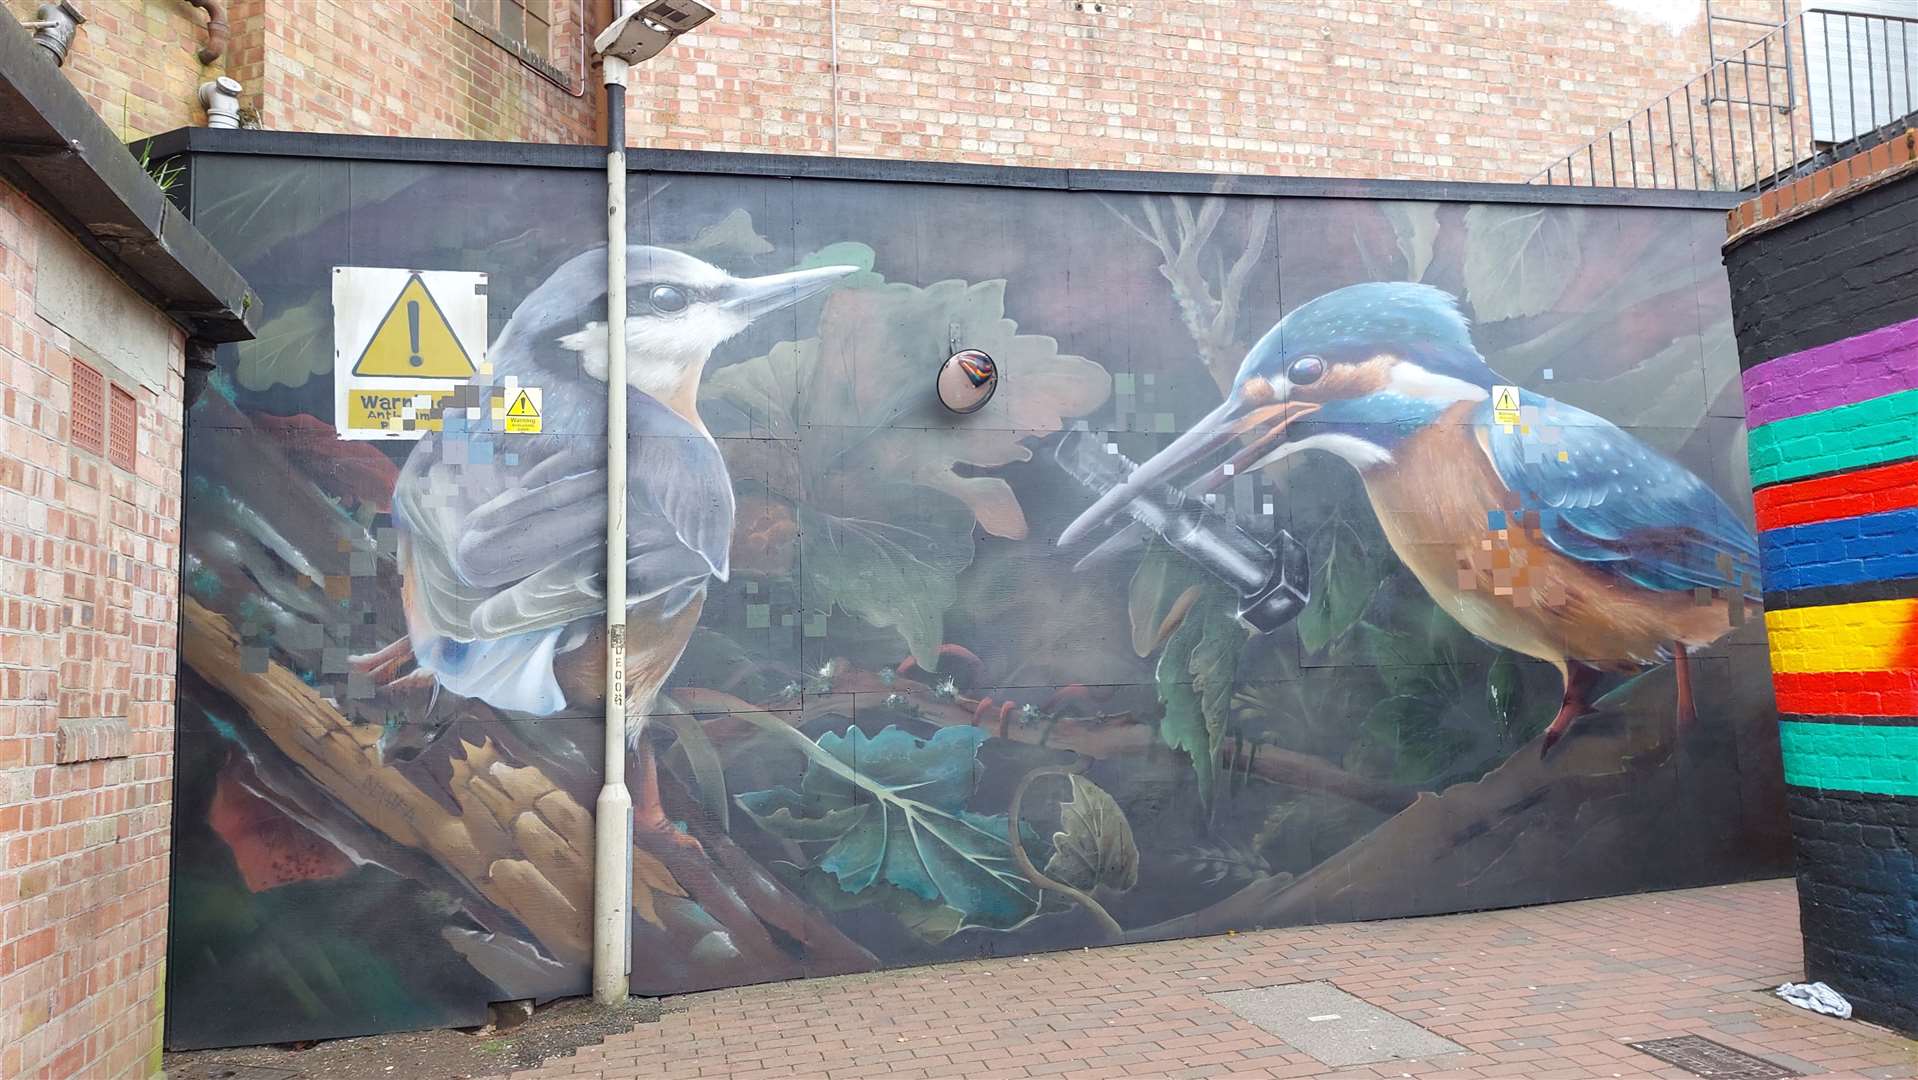 Aspire's 'Workers of the World" mural in St Johns Lane passageway